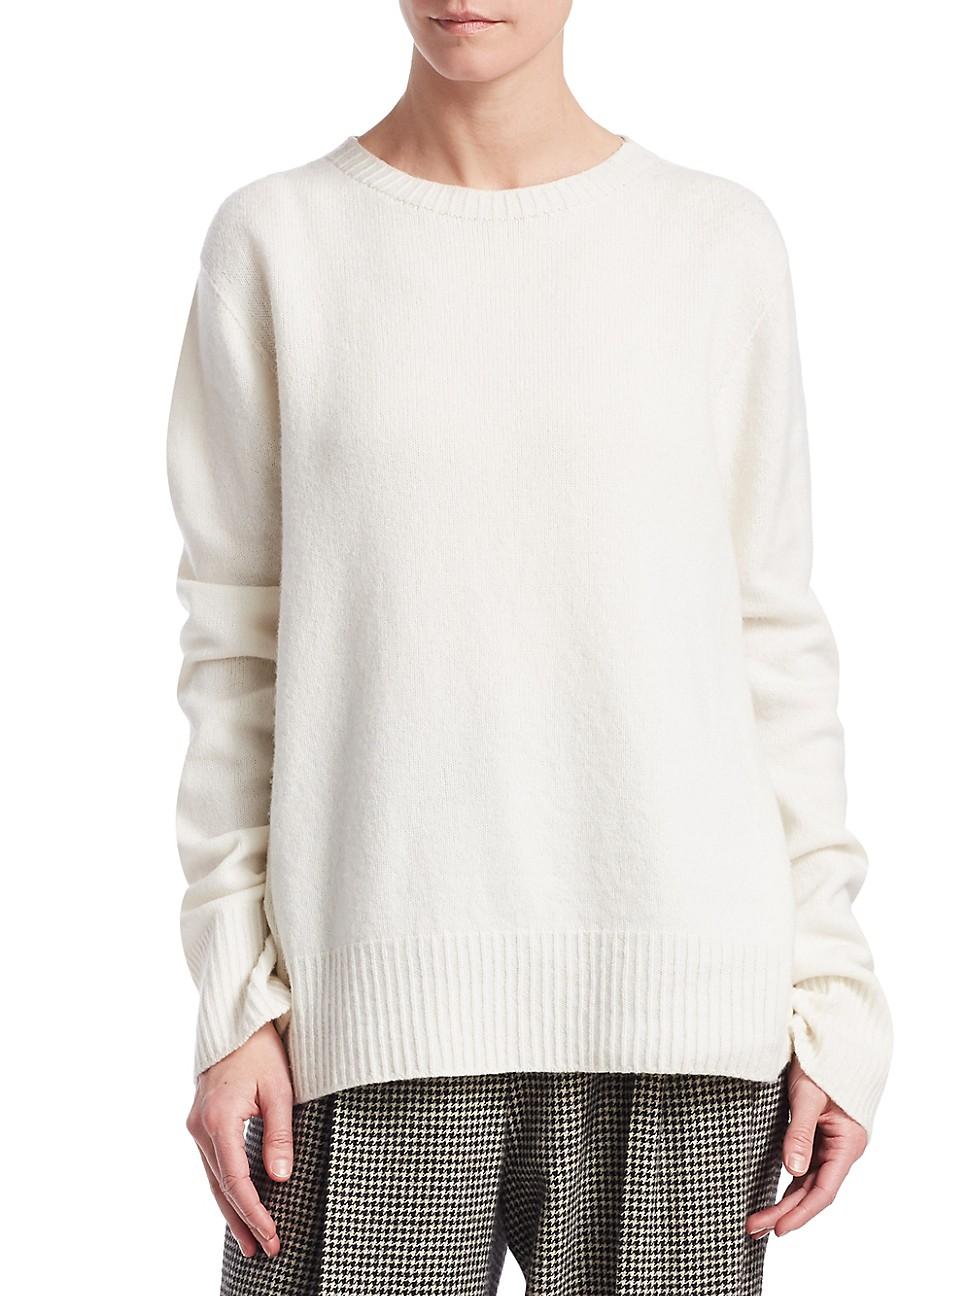 The Row Wool Sibel Pullover Sweater in Ivory (White) - Lyst